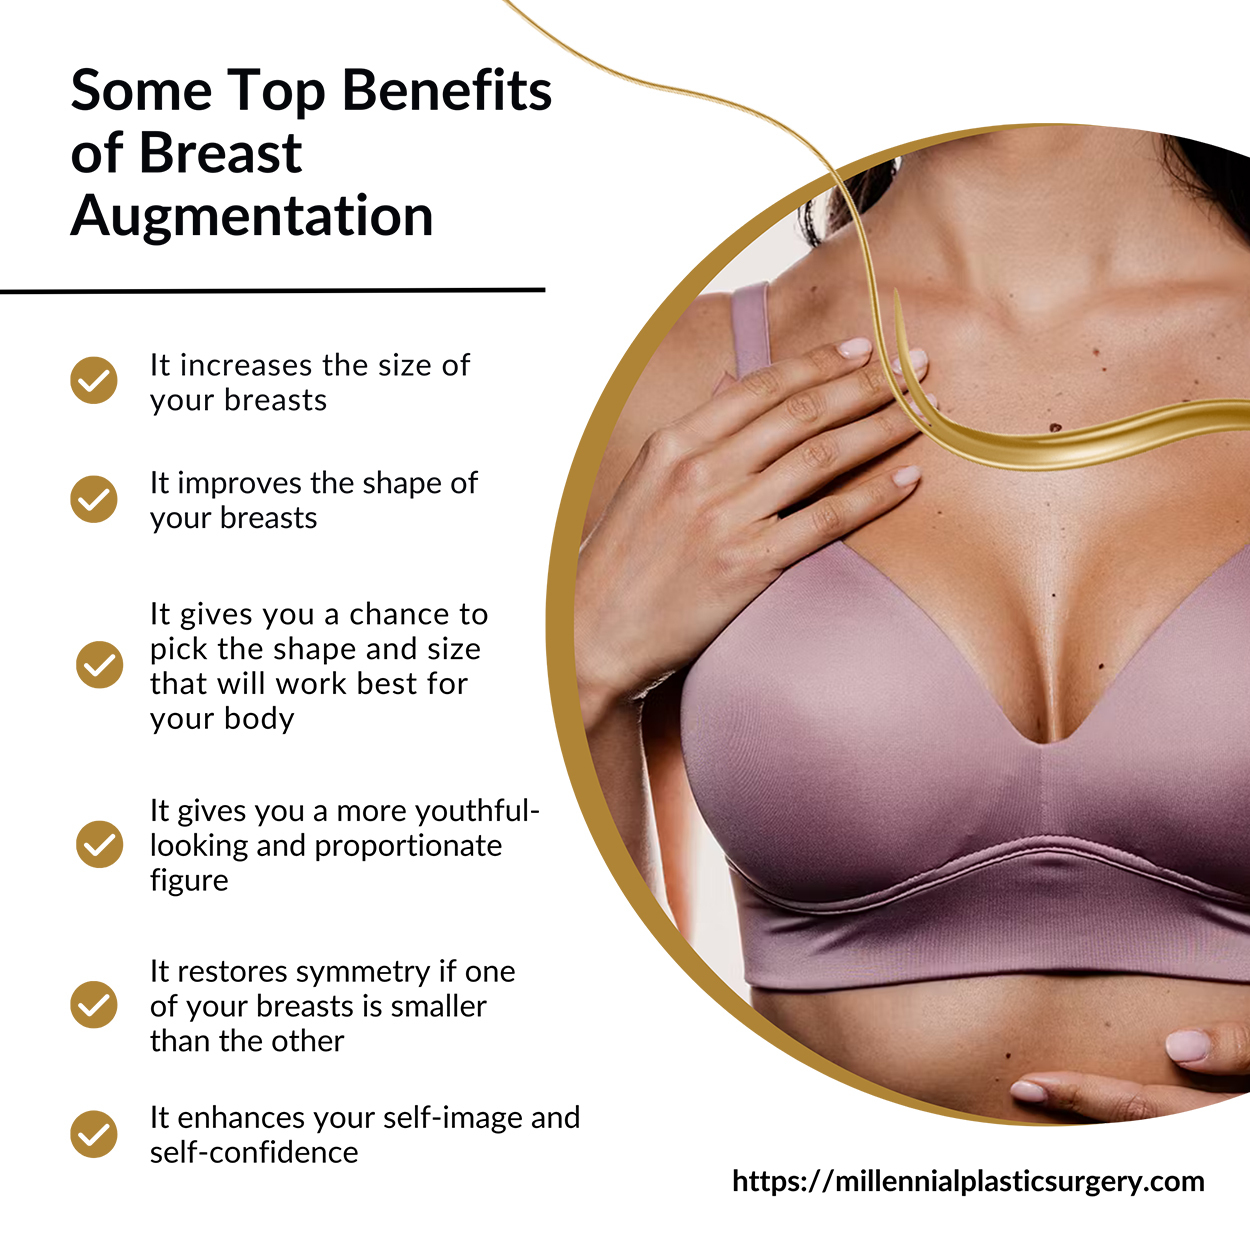 How Many CCs Should You Get With Breast Augmentation?